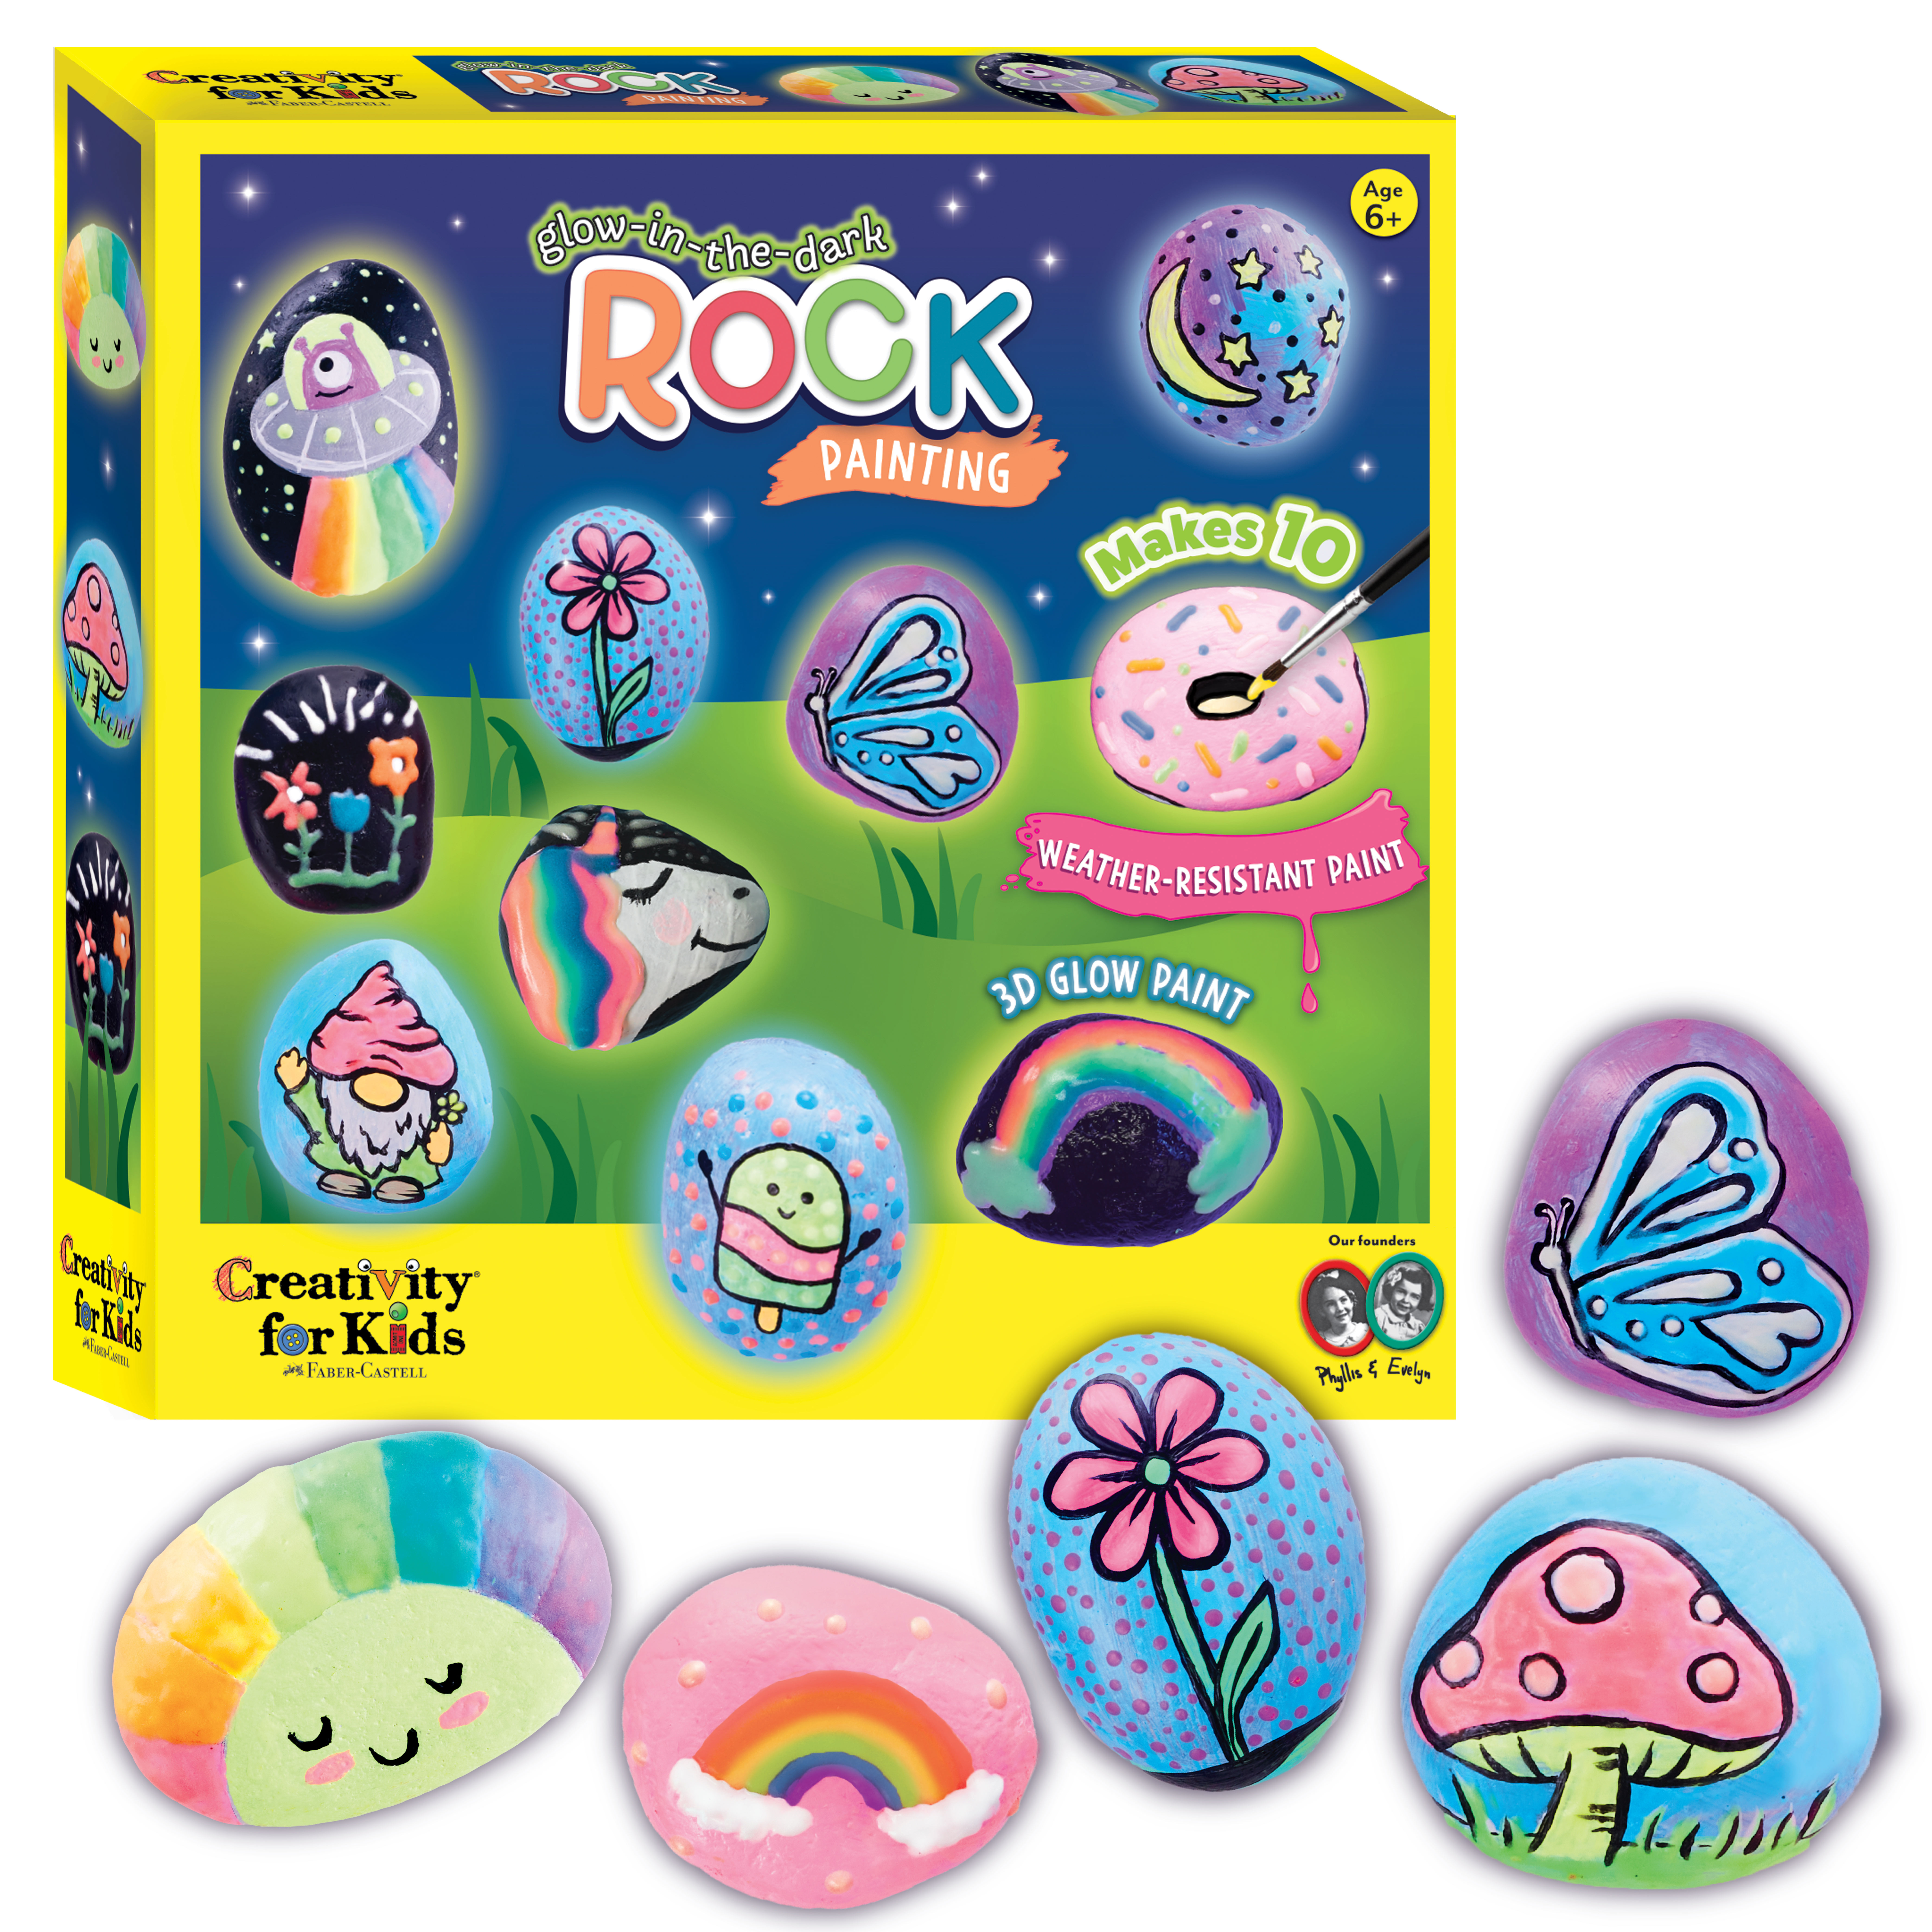 Creativity for Kids Glow in the Dark Rock Painting Kit - Child Craft Project for Boys and Girls, Multicolor